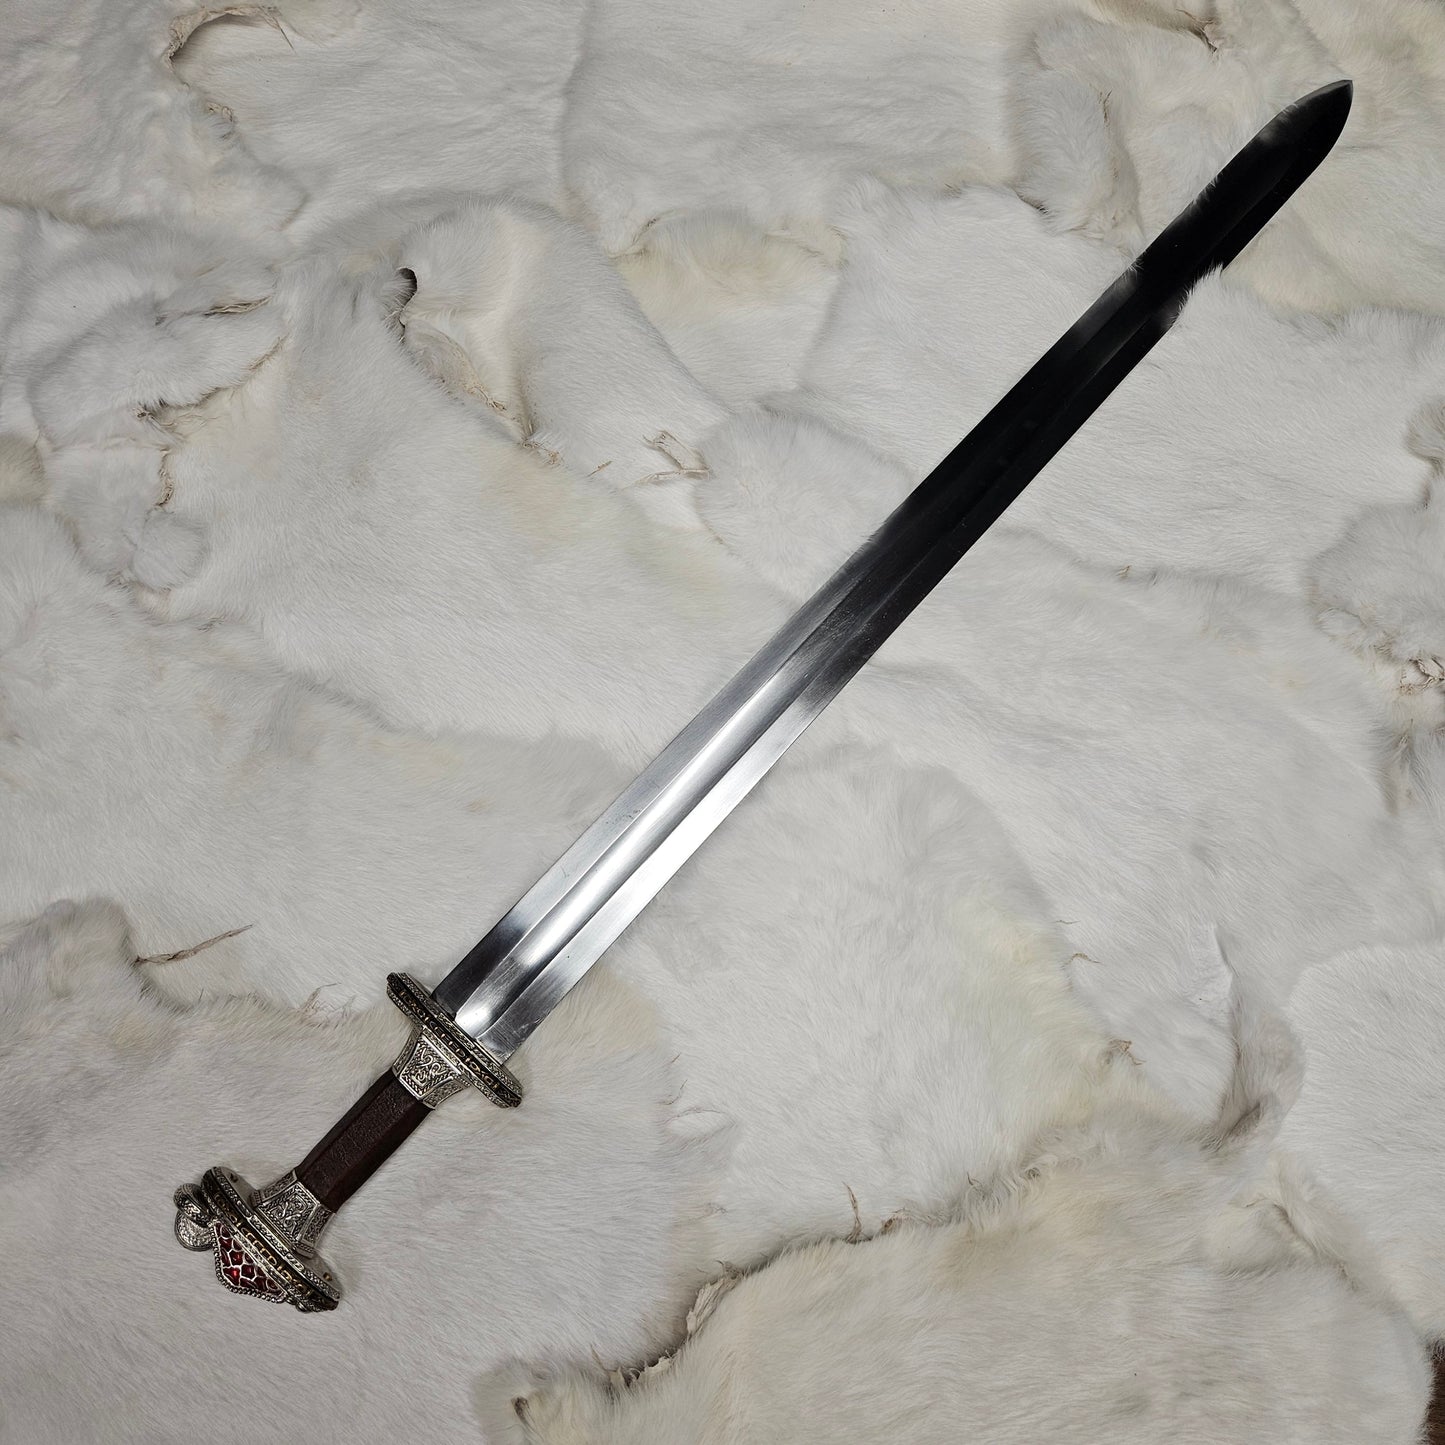 Vendel Chieftain Sword with Tin Plating and Brass Accents